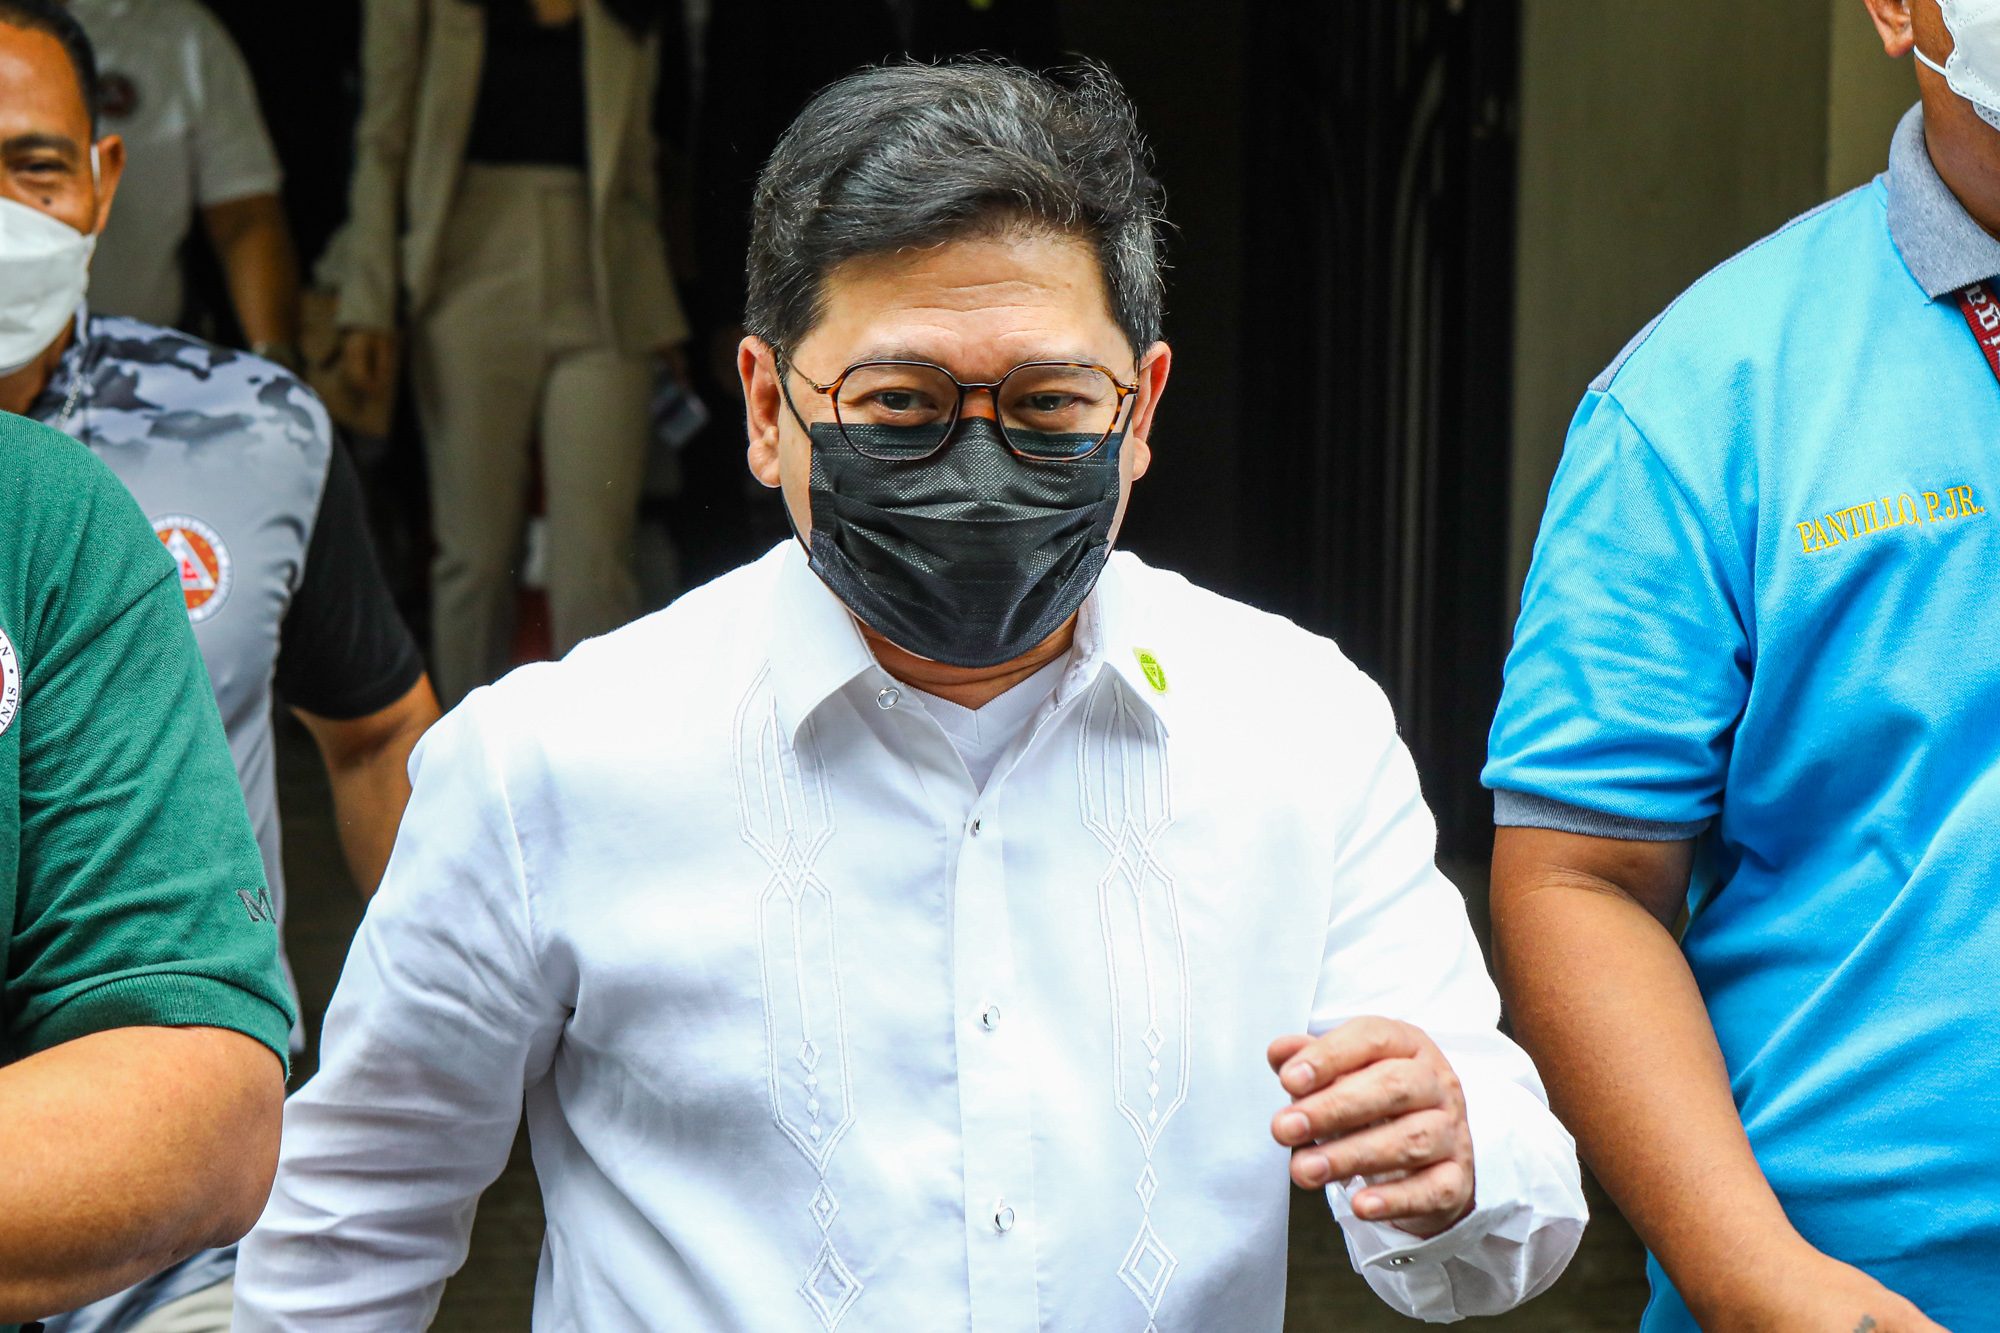 Ex-QC mayor Bautista, city administrator plead not guilty to P32-M graft charge